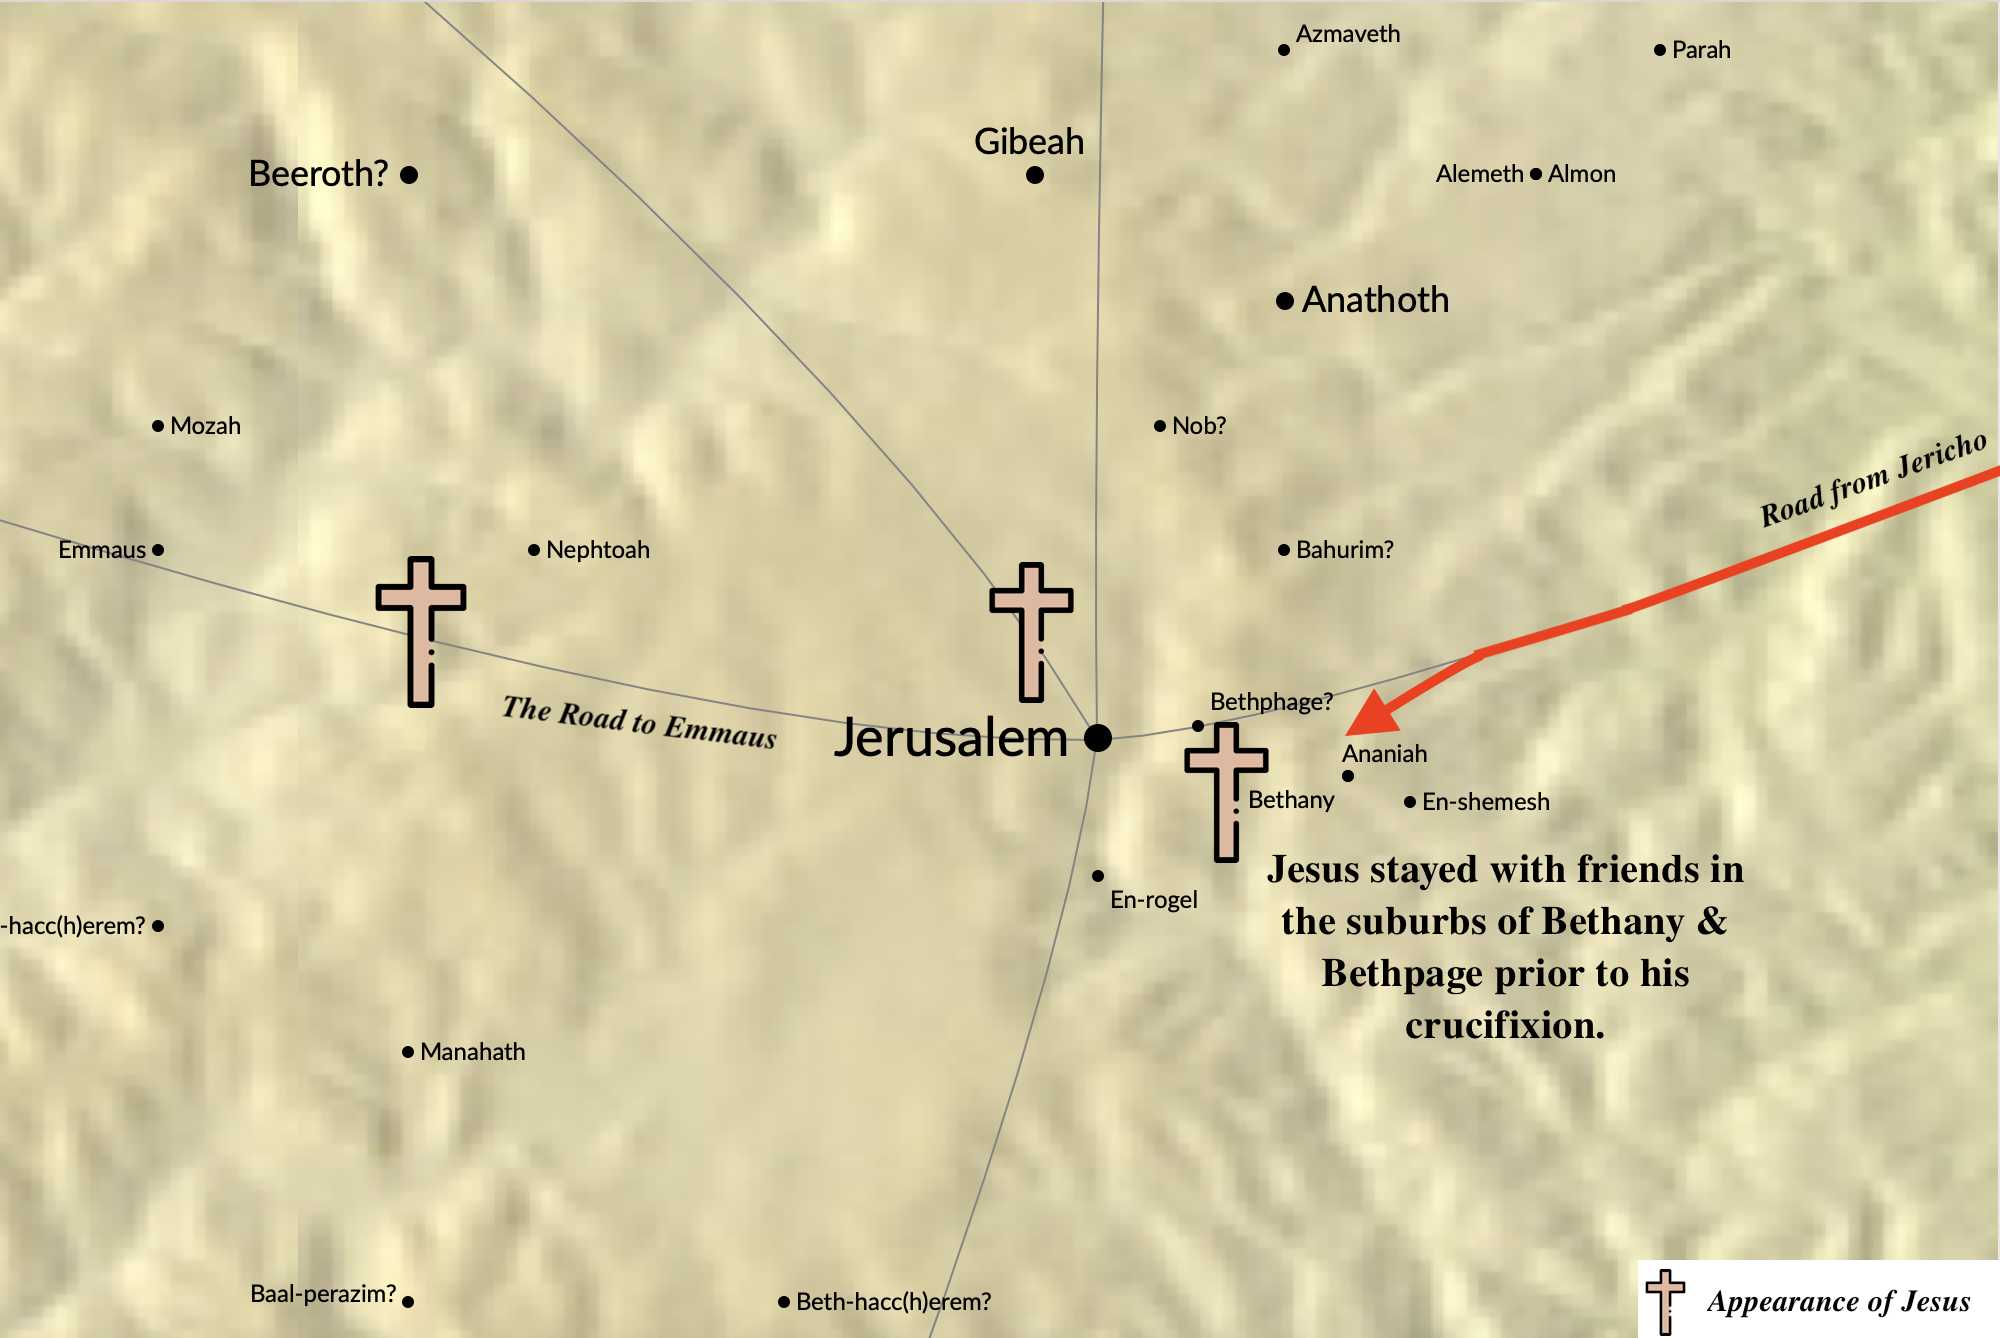 A map of the appearances of the resurrected Jesus in Jerusalem following his crucifixion.